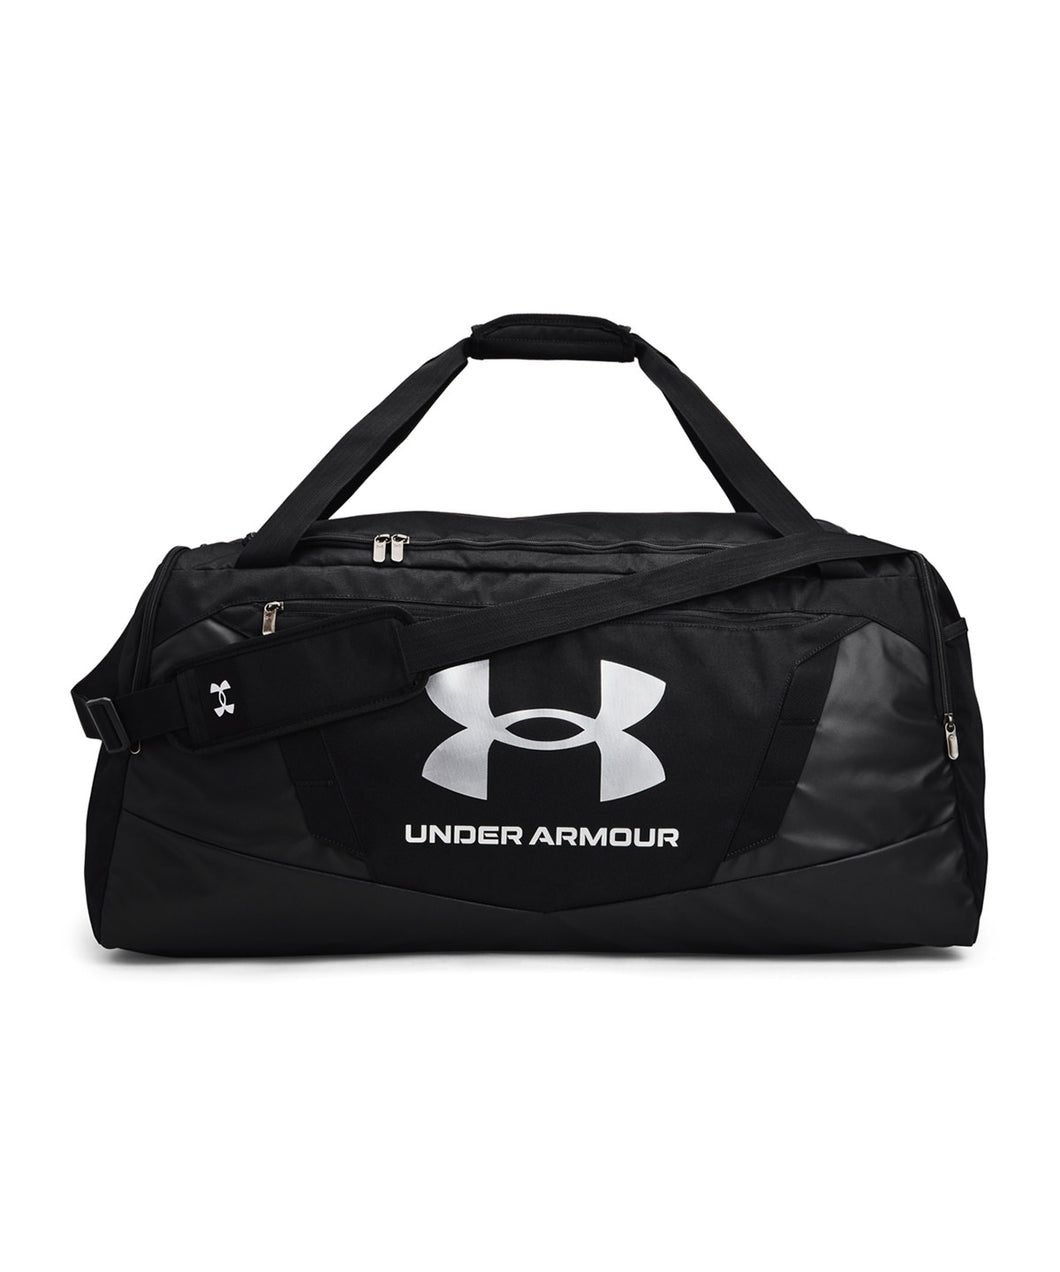 UNDER ARMOUR SMALL DUFFLE BAG - BLACK